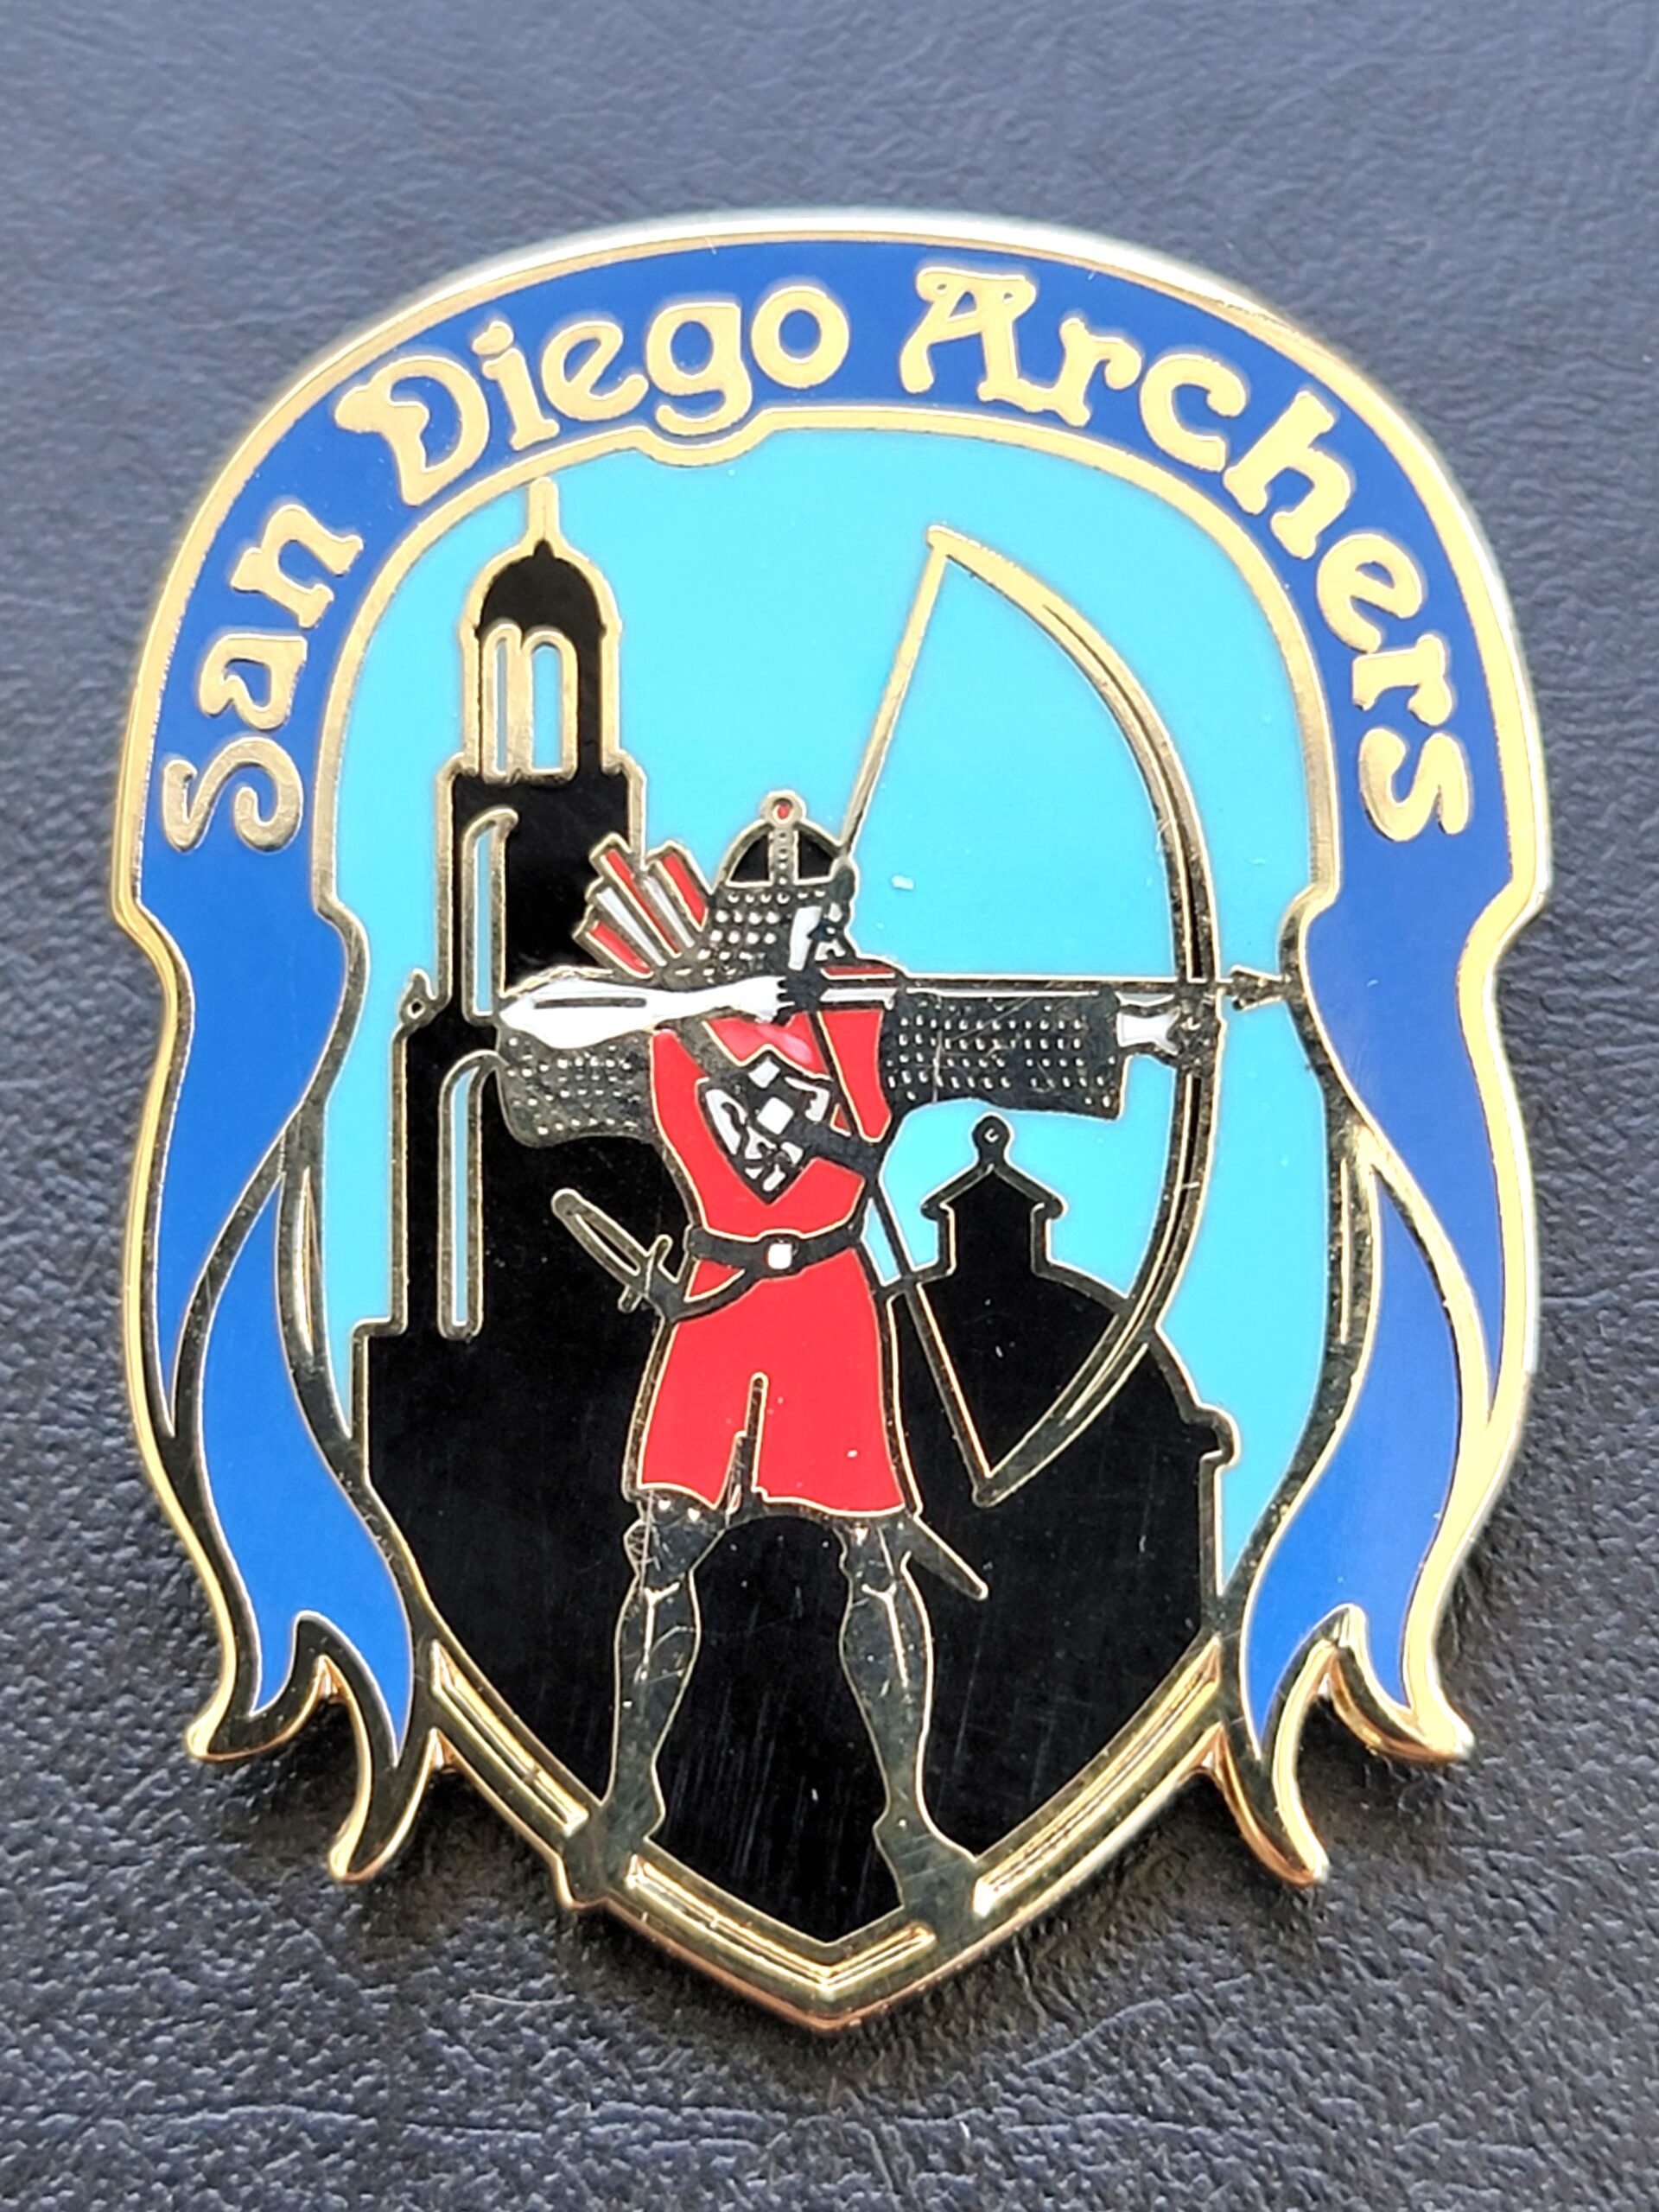 San Diego Archers Pin Design Update, 1st place pin.